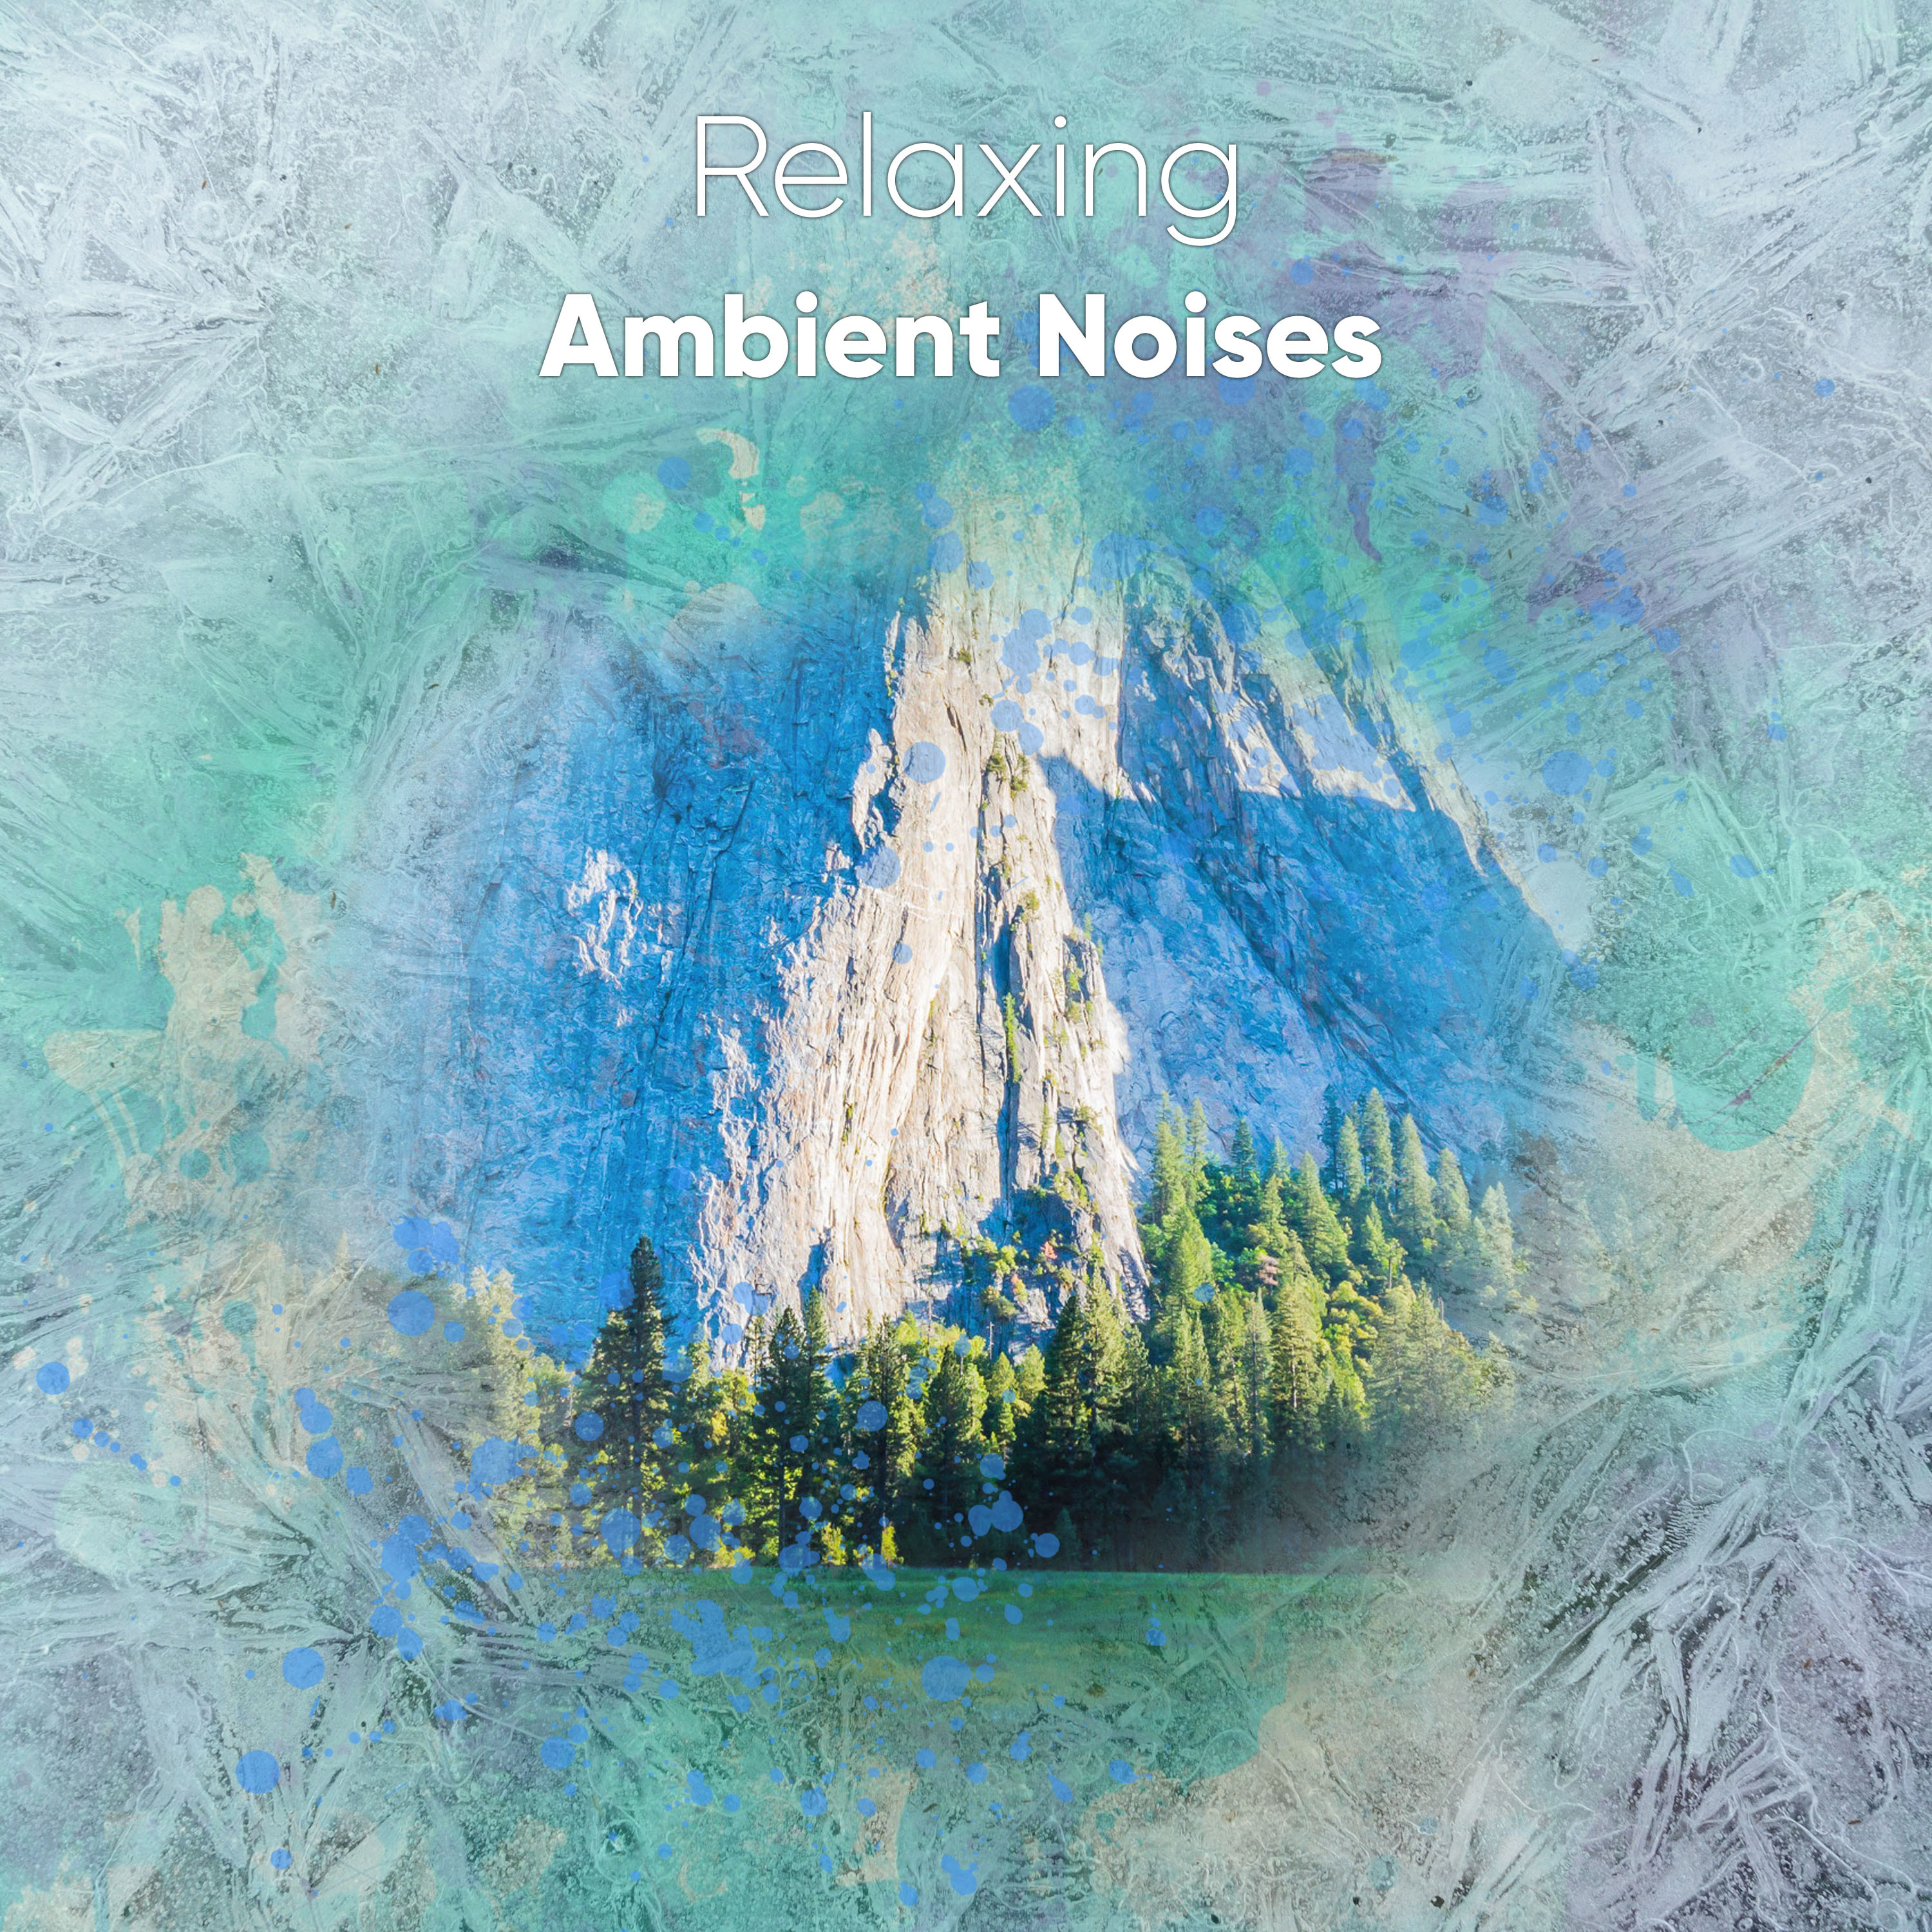 #16 Relaxing, Ambient Noises for Mindfulness